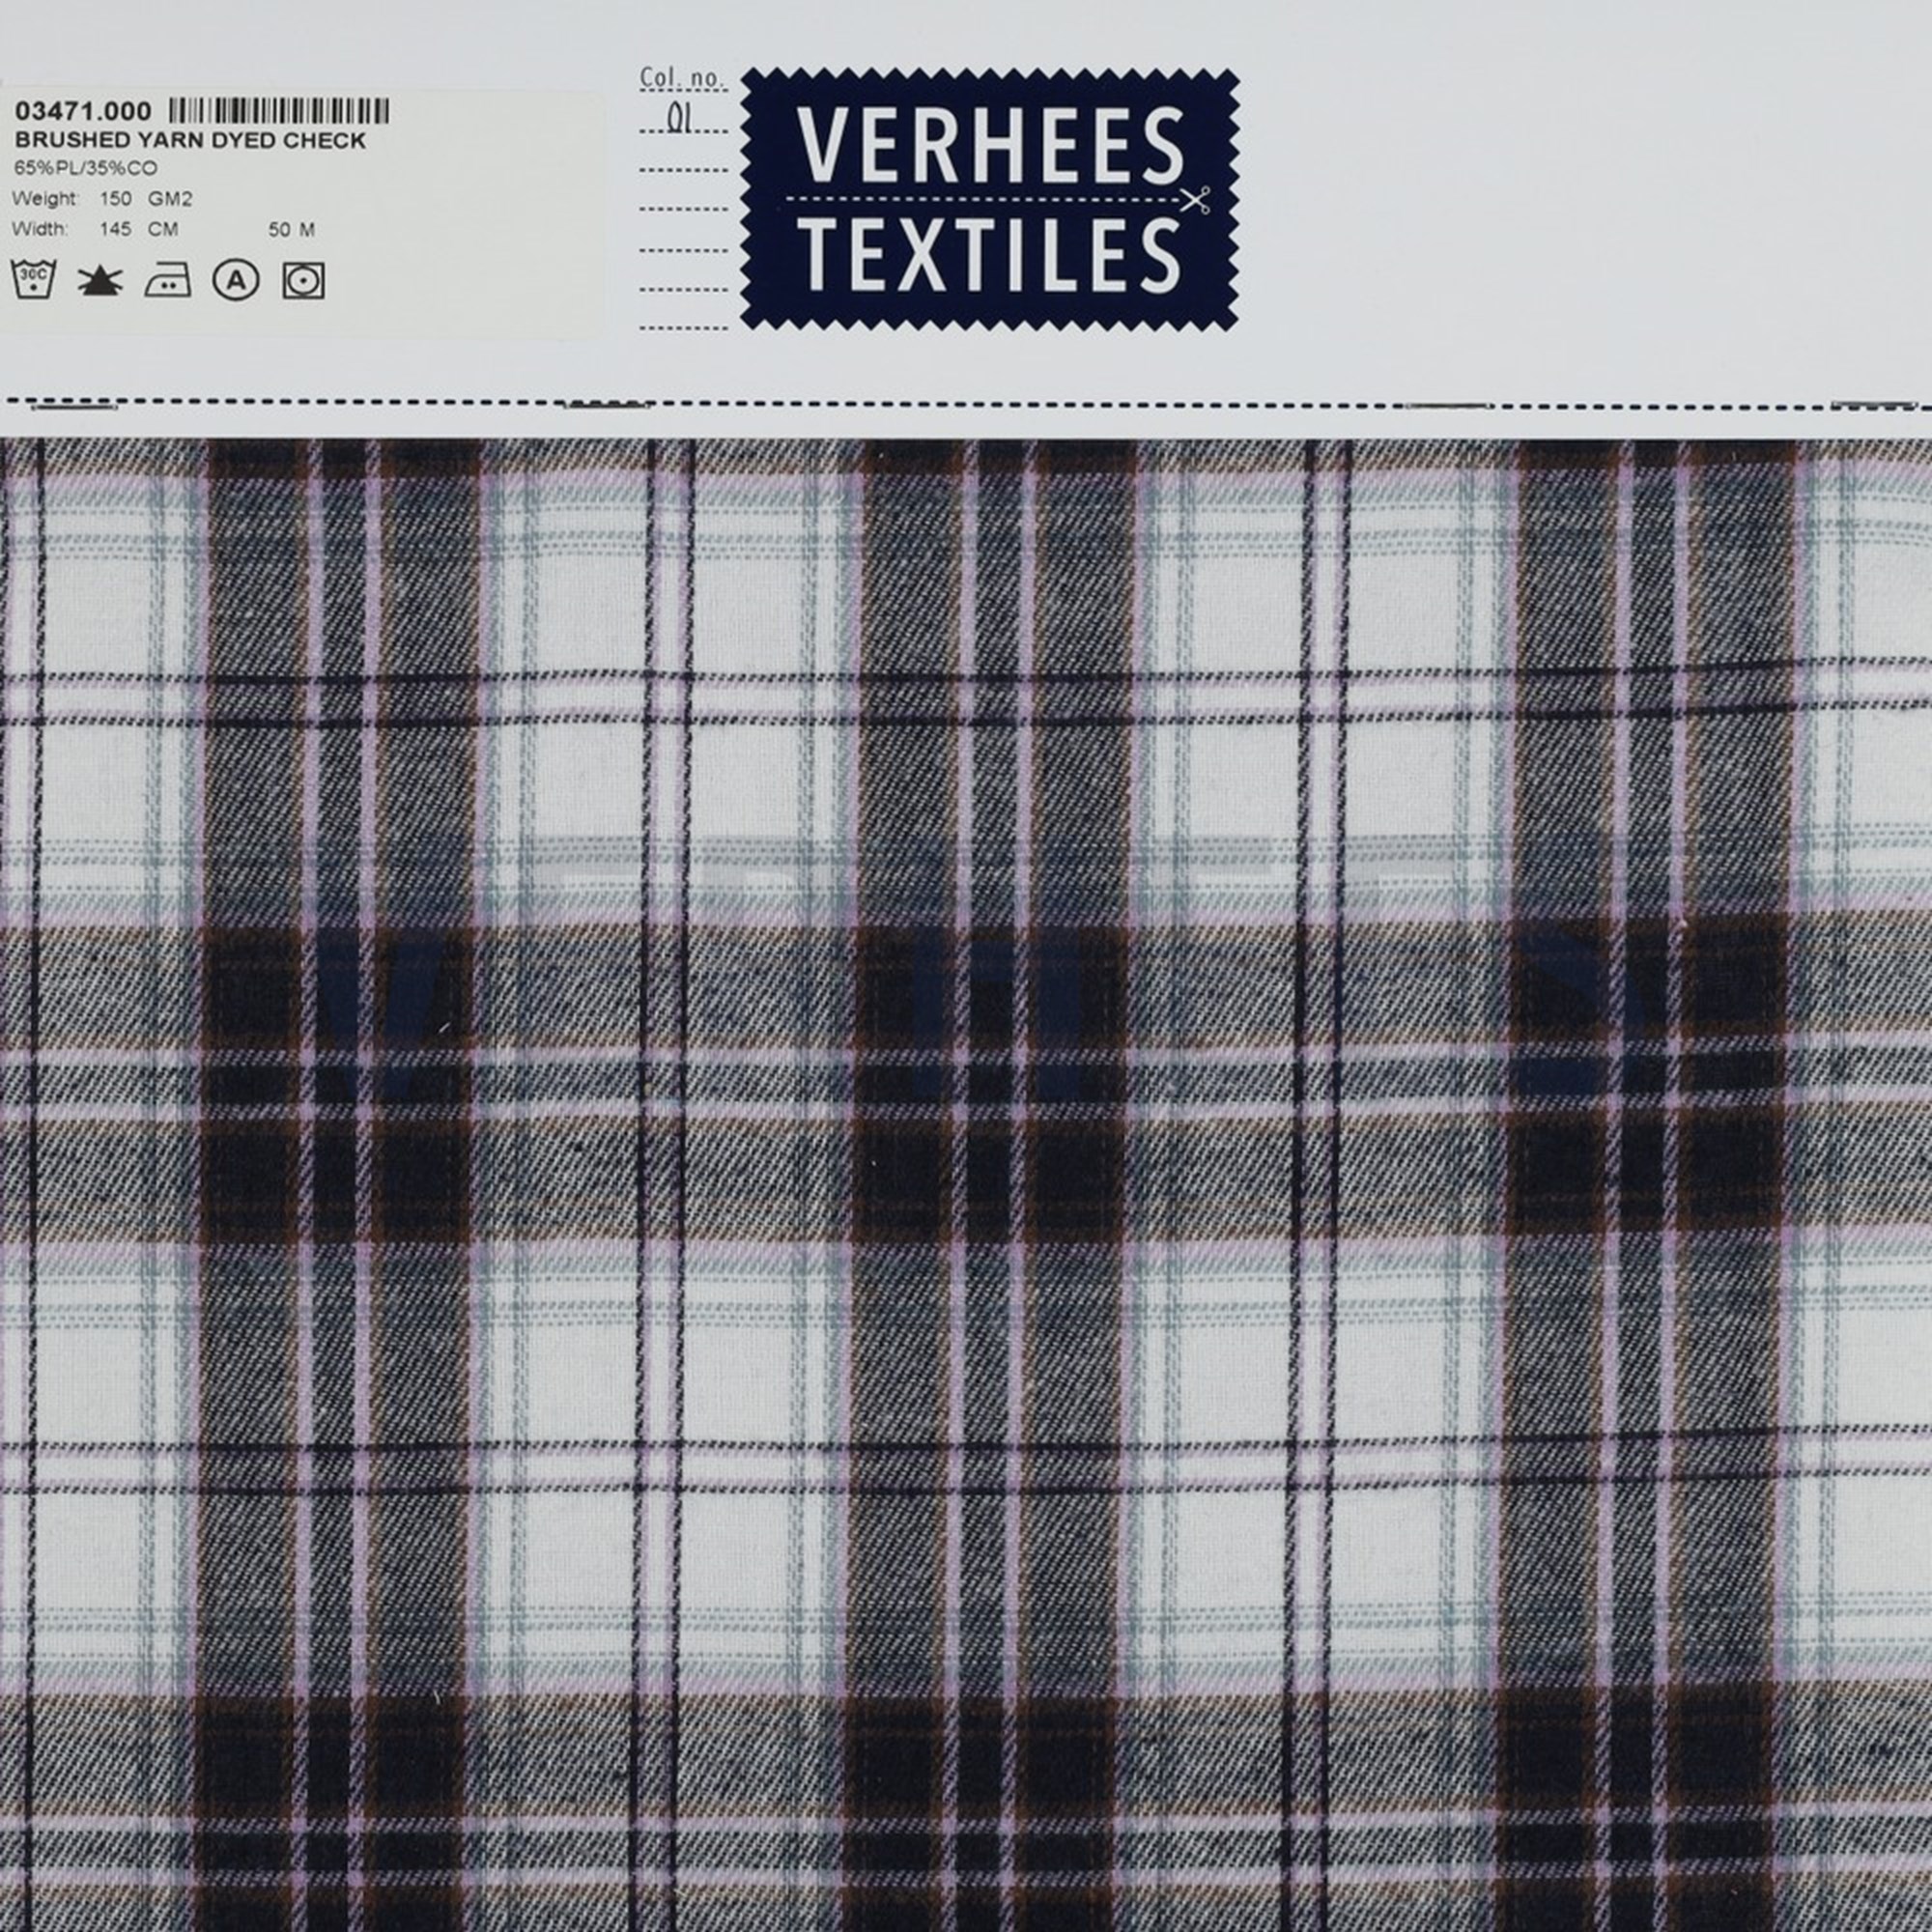 BRUSHED YARN DYED CHECK NAVY (high resolution) #4